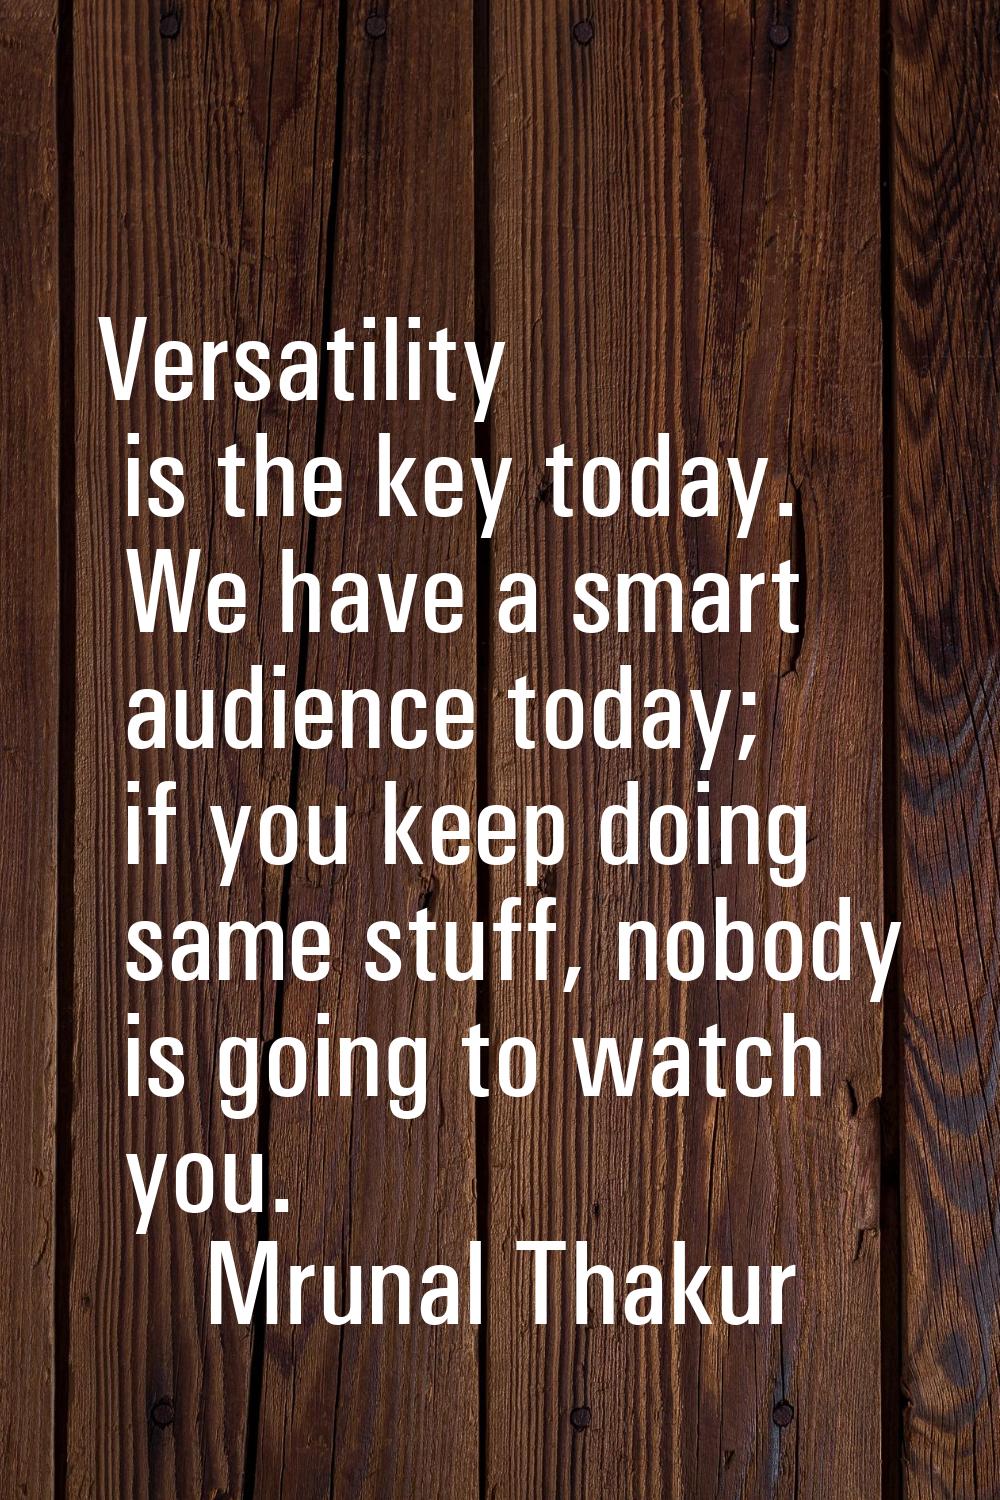 Versatility is the key today. We have a smart audience today; if you keep doing same stuff, nobody 